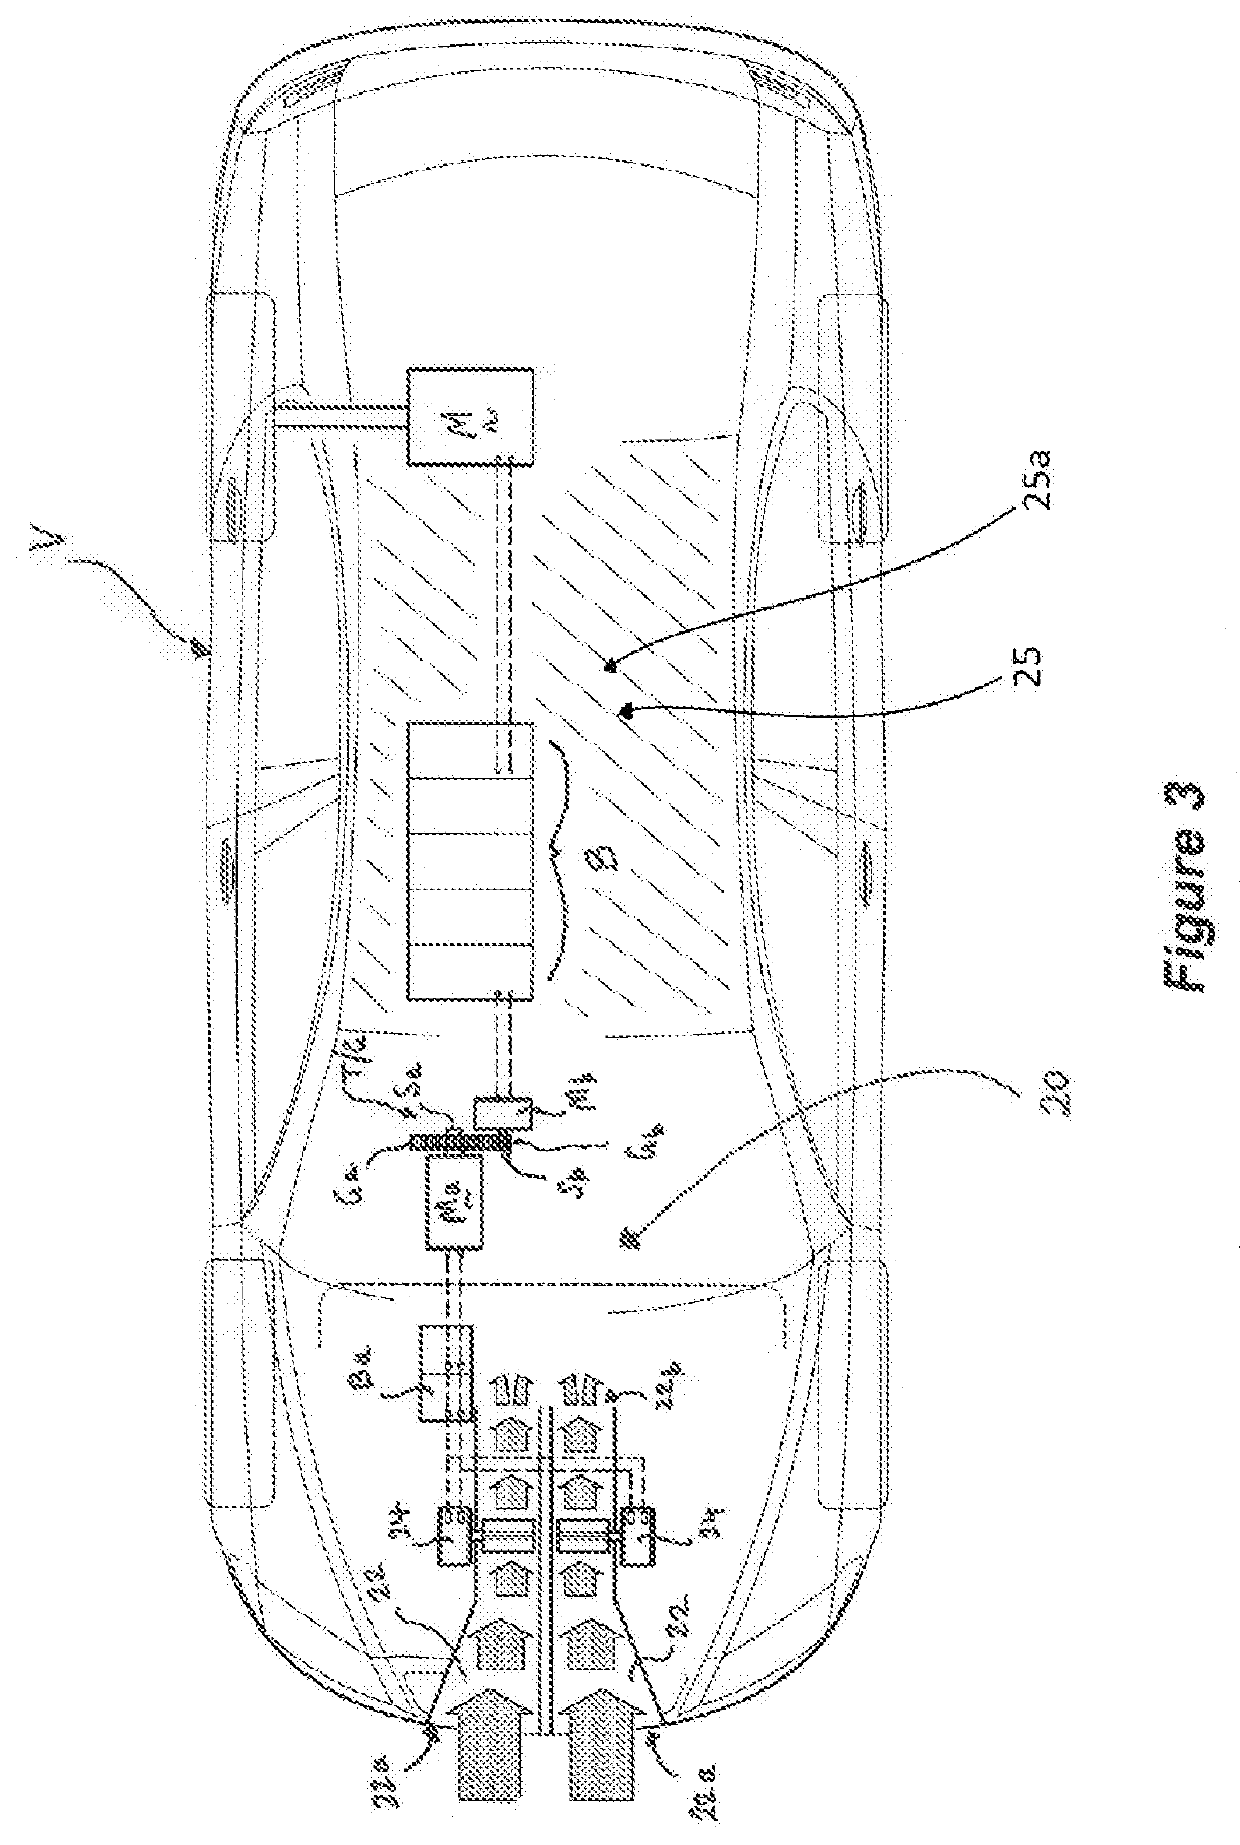 A System and Method for Enhanced Operation of Electric Vehicles